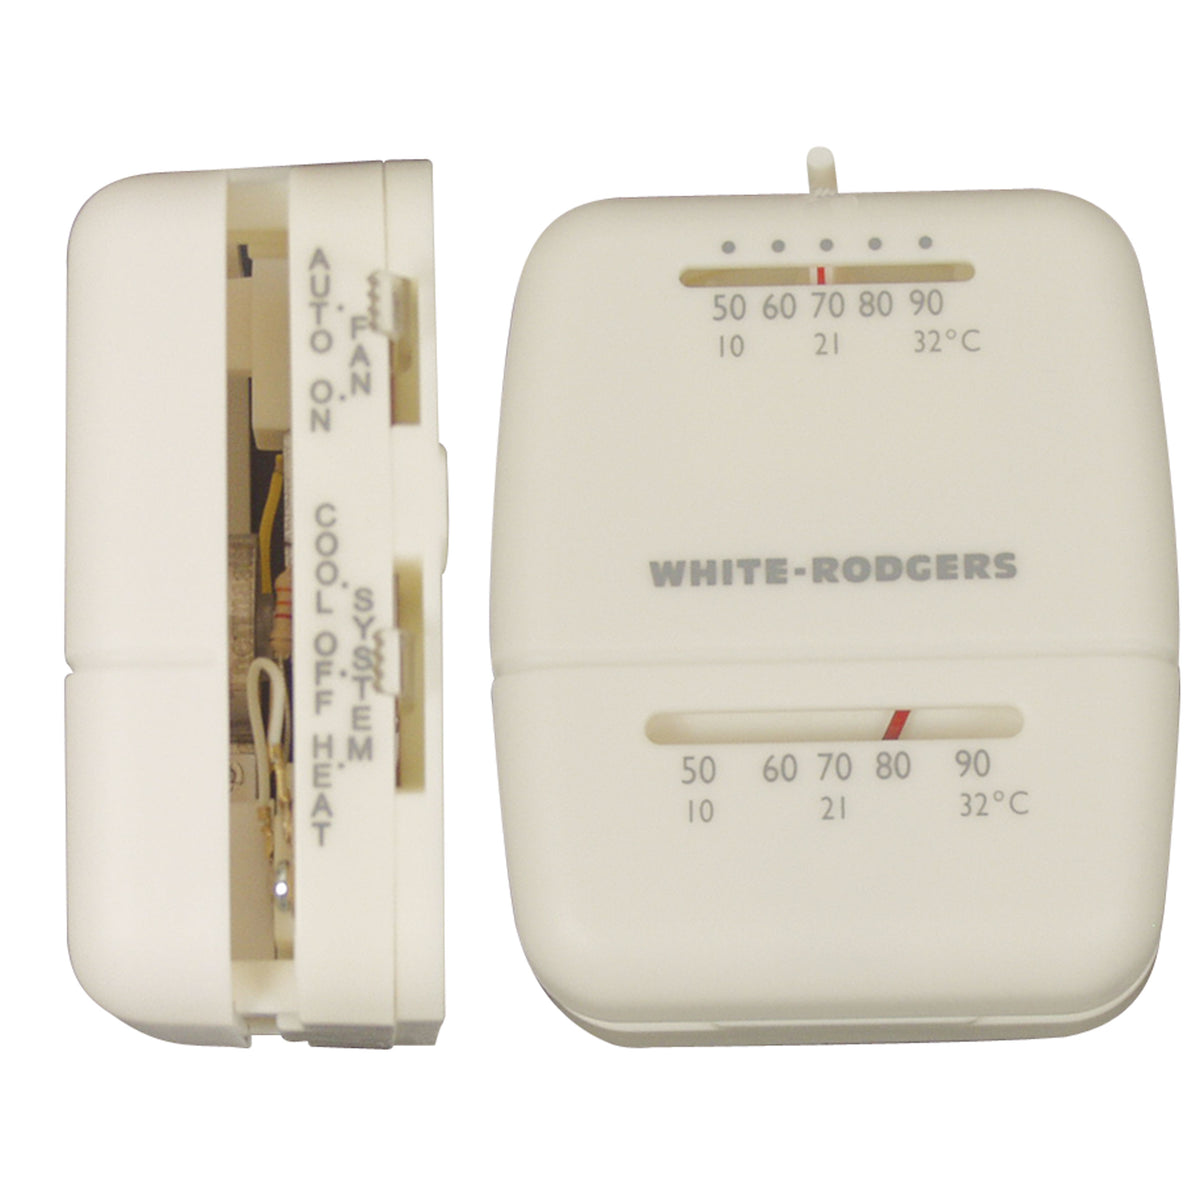 White-Rodgers 7301 (1C26-101S1) White-Rodgers Heat/Cool Thermostat